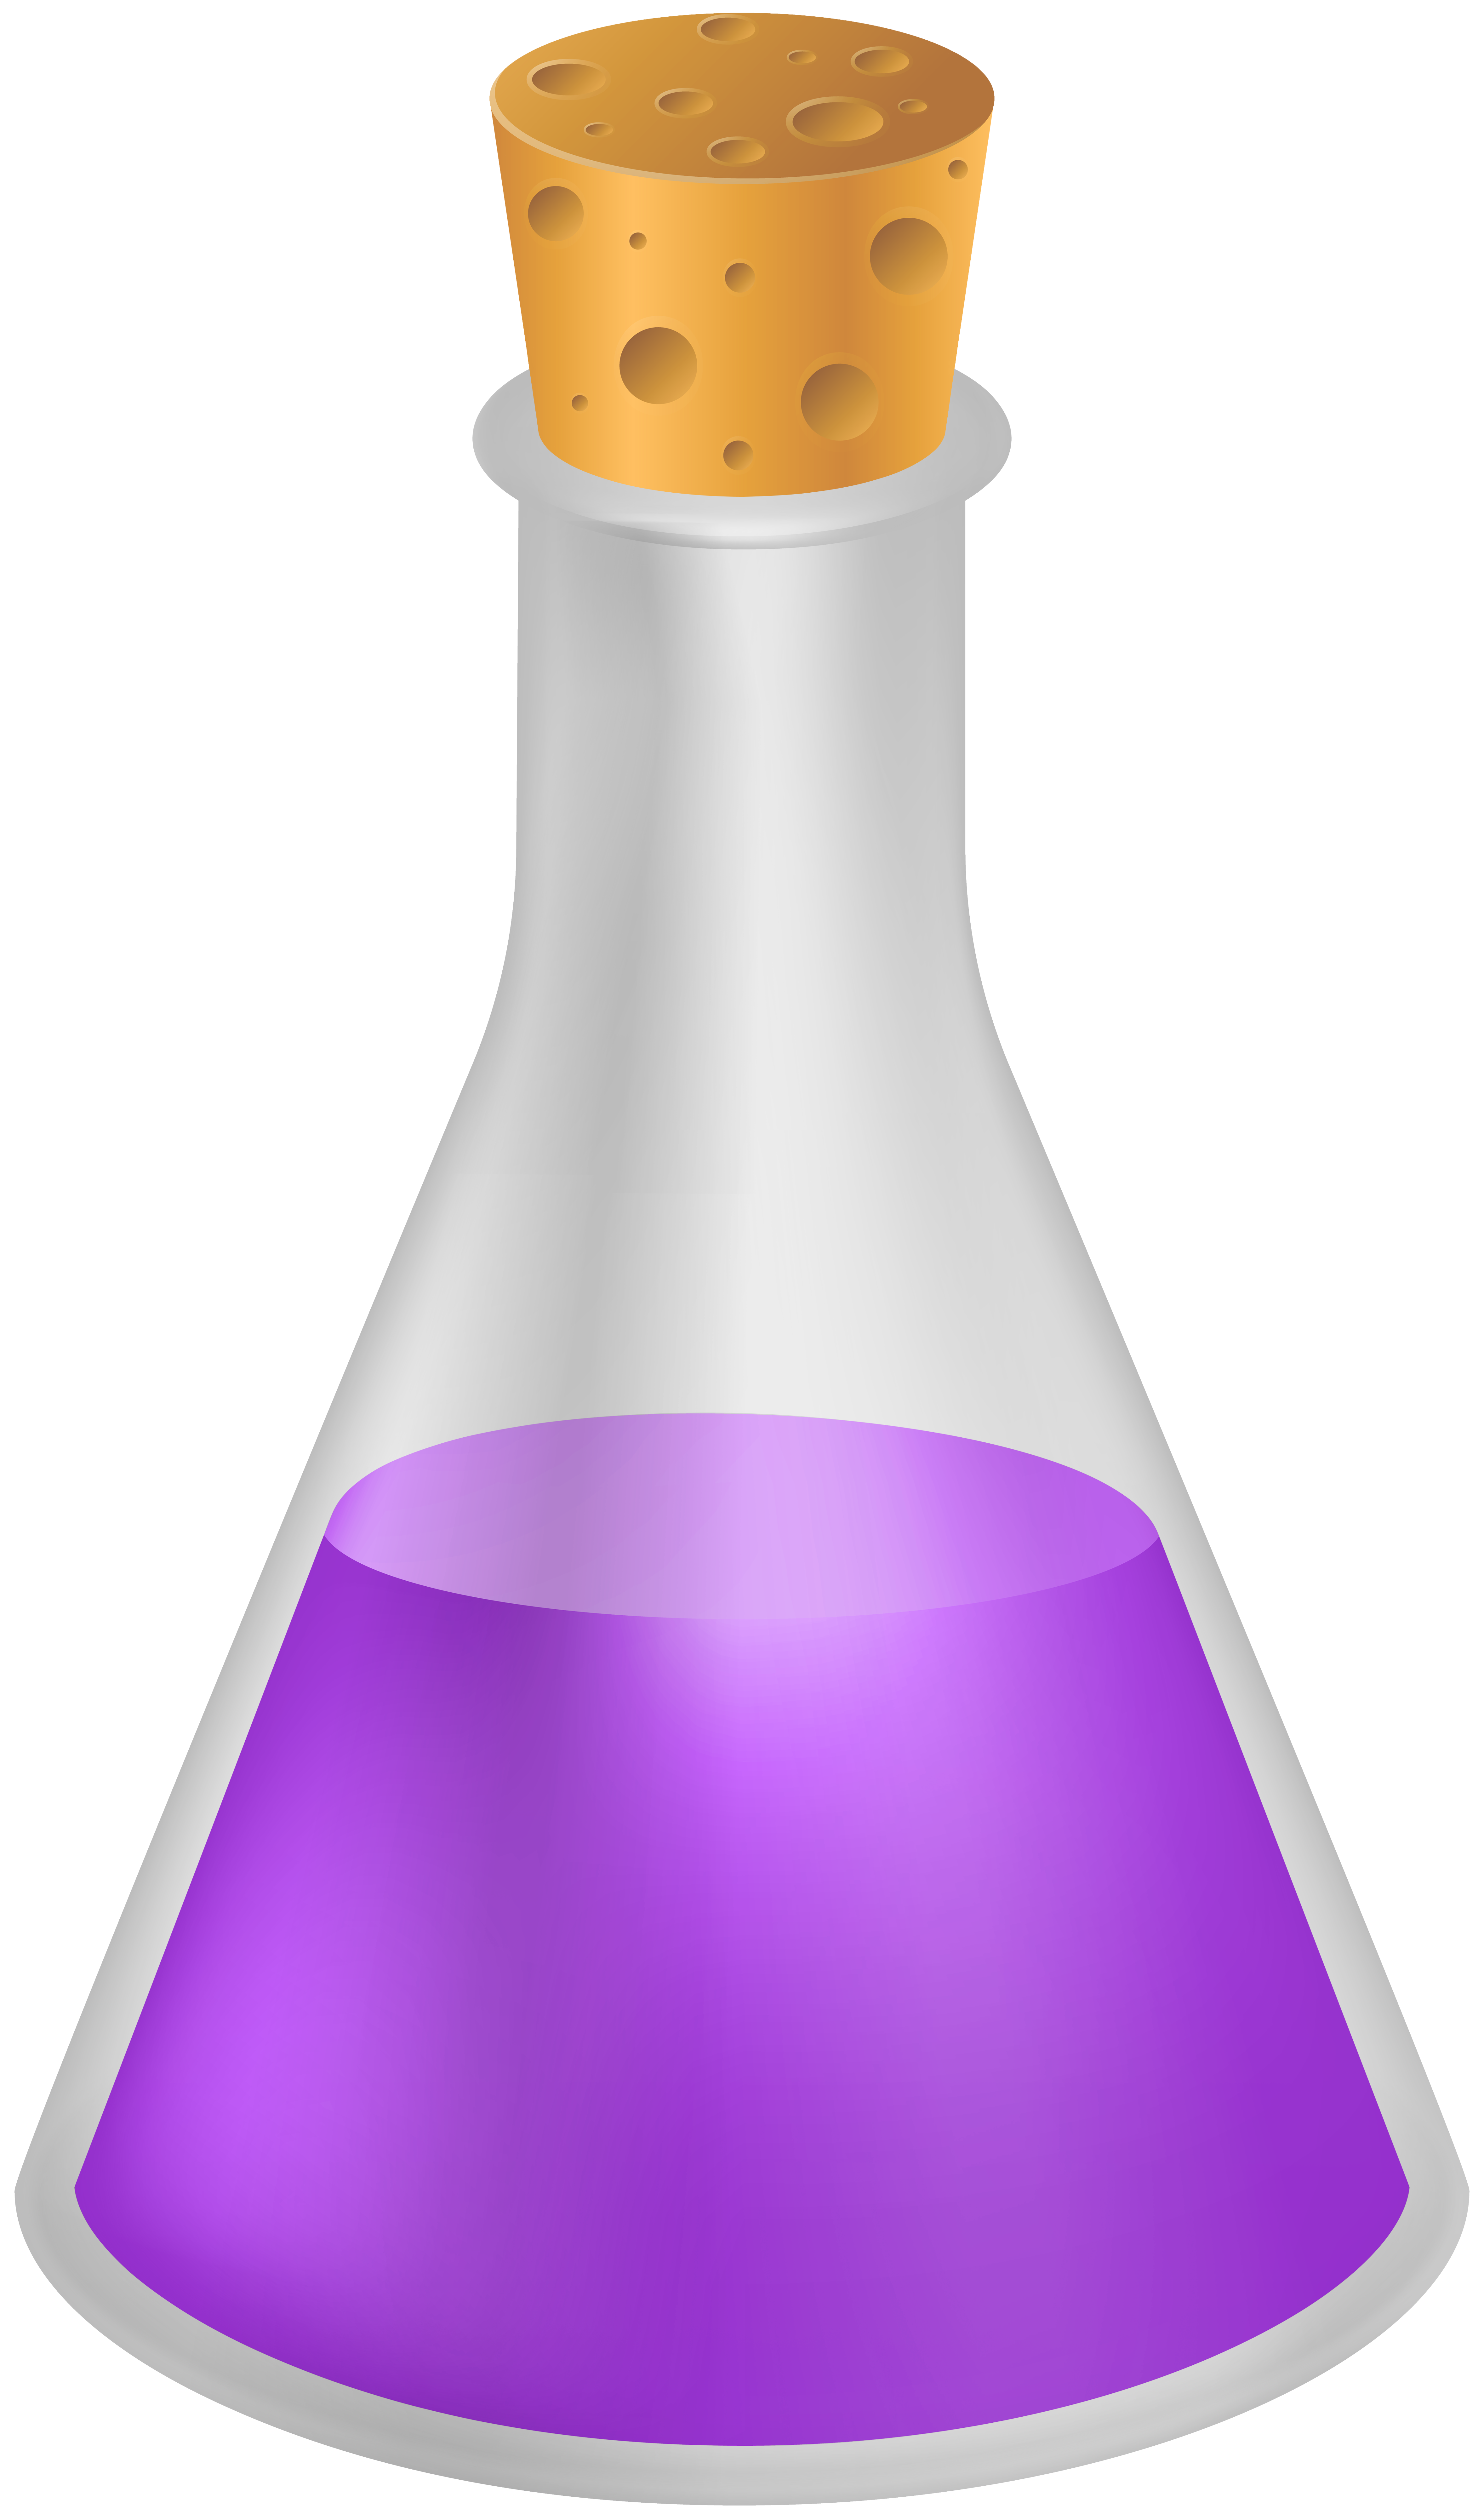 Transparent Purple Flask PNG Clipart​  Gallery Yopriceville - High-Quality  Free Images and Transparent PNG Clipart